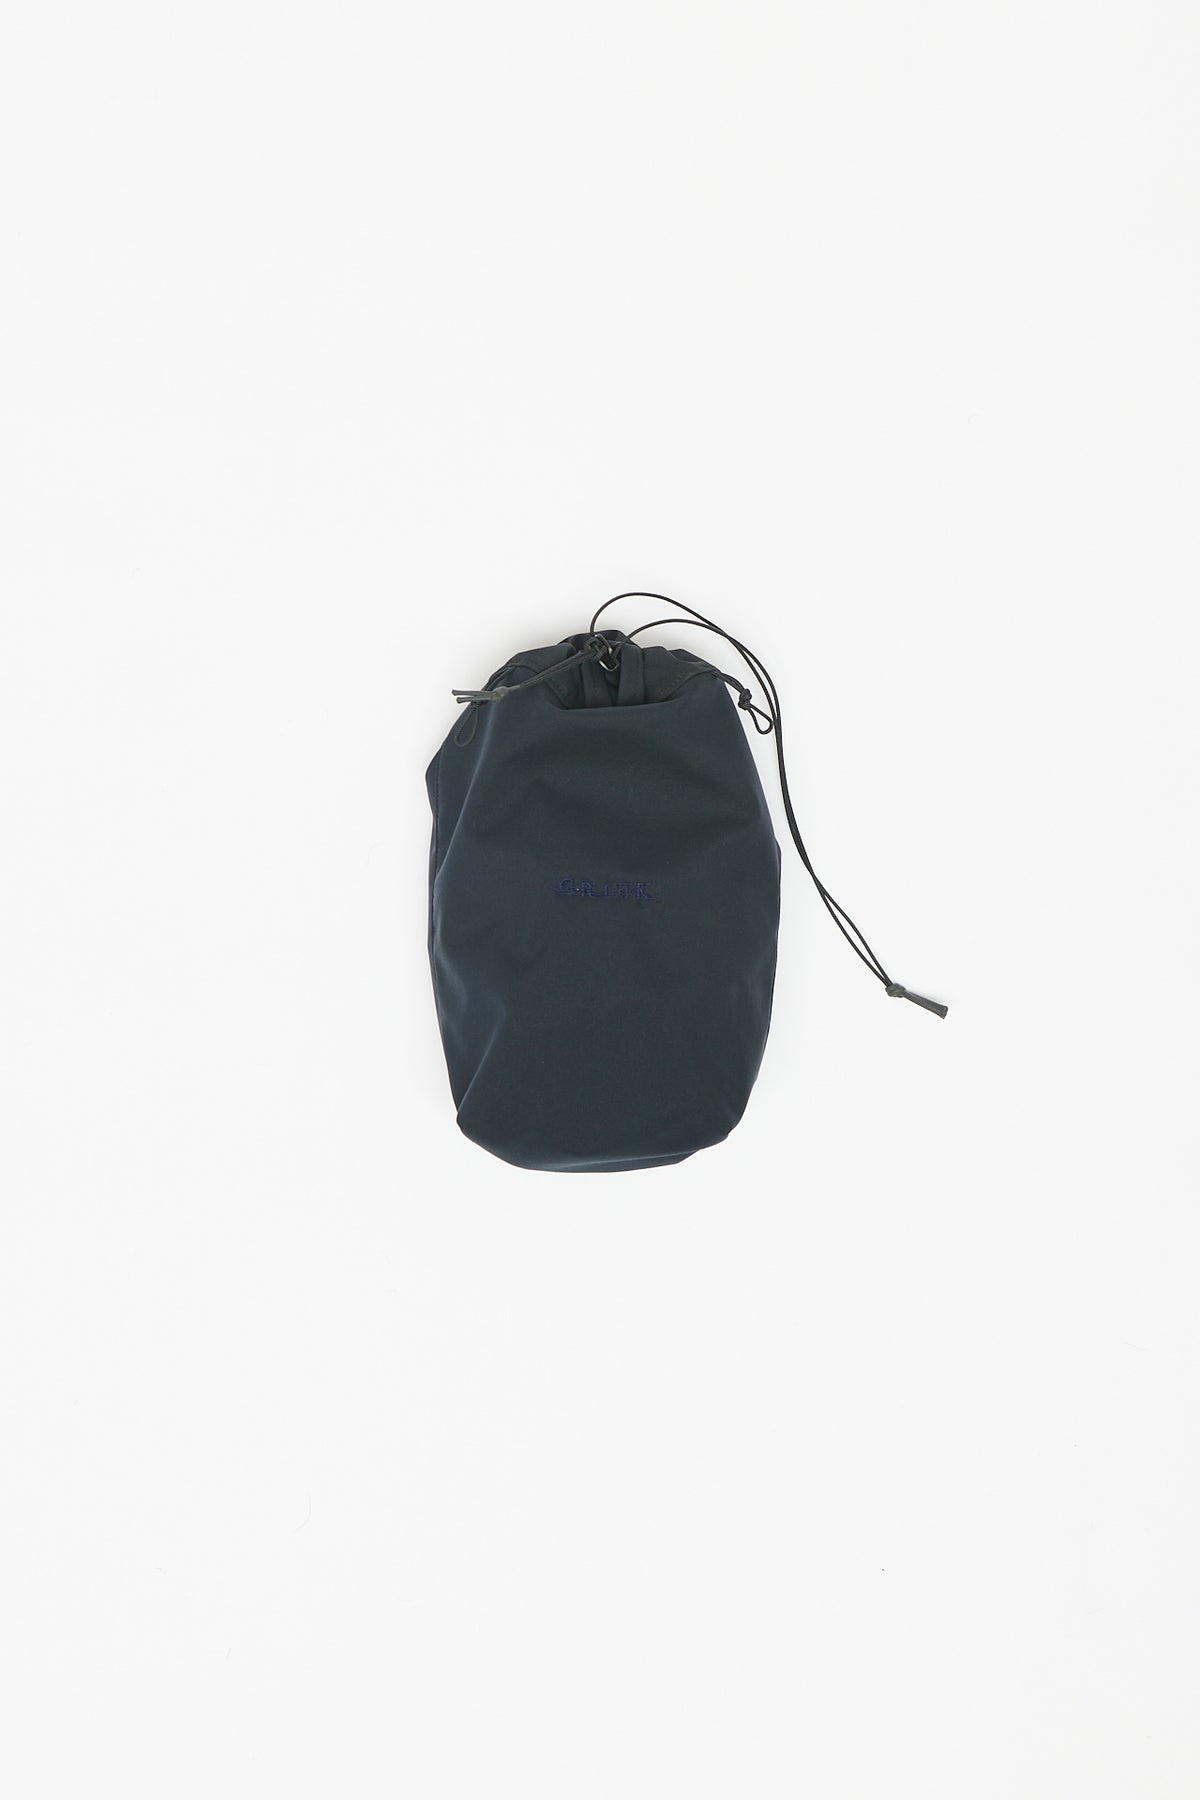 POUCH - BLUE NAVY